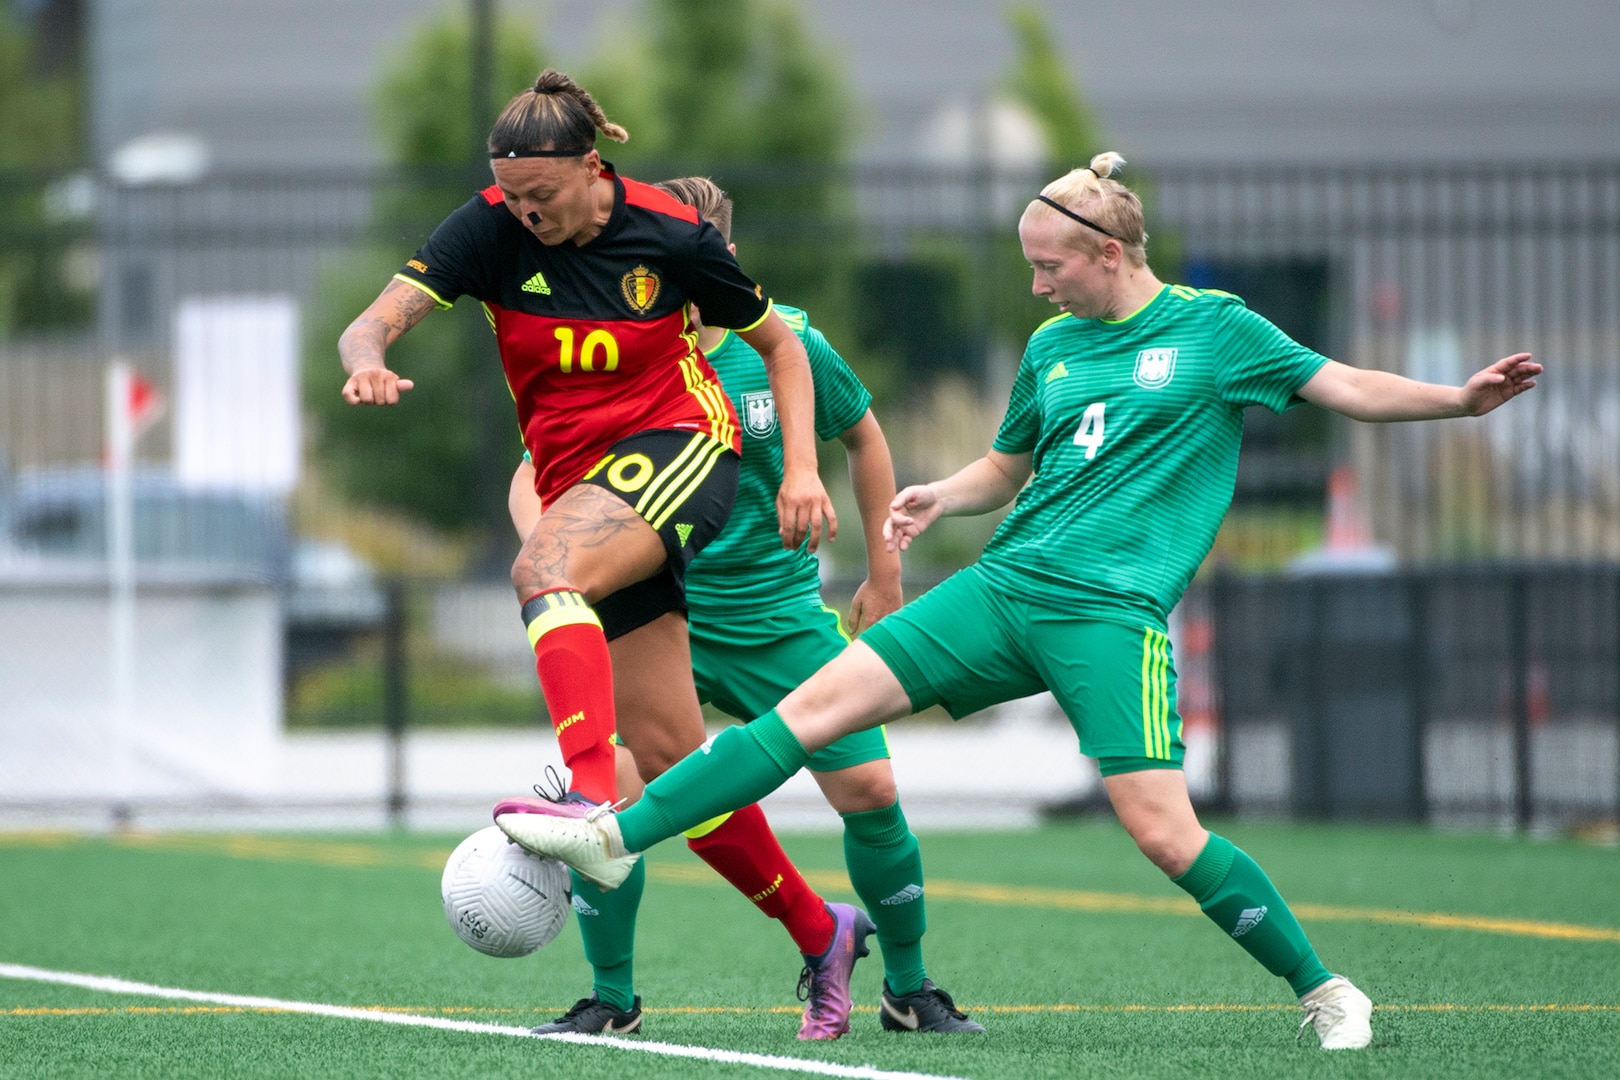 Germany’s Alexandra De Lucia, right, battles for a ball with Belgium’s Delphine Fraipont during the 13th CISM (International Military Sports Council) World Military Women’s Football Championship in Meade, Washington July 13, 2022. (DoD photo by EJ Hersom)